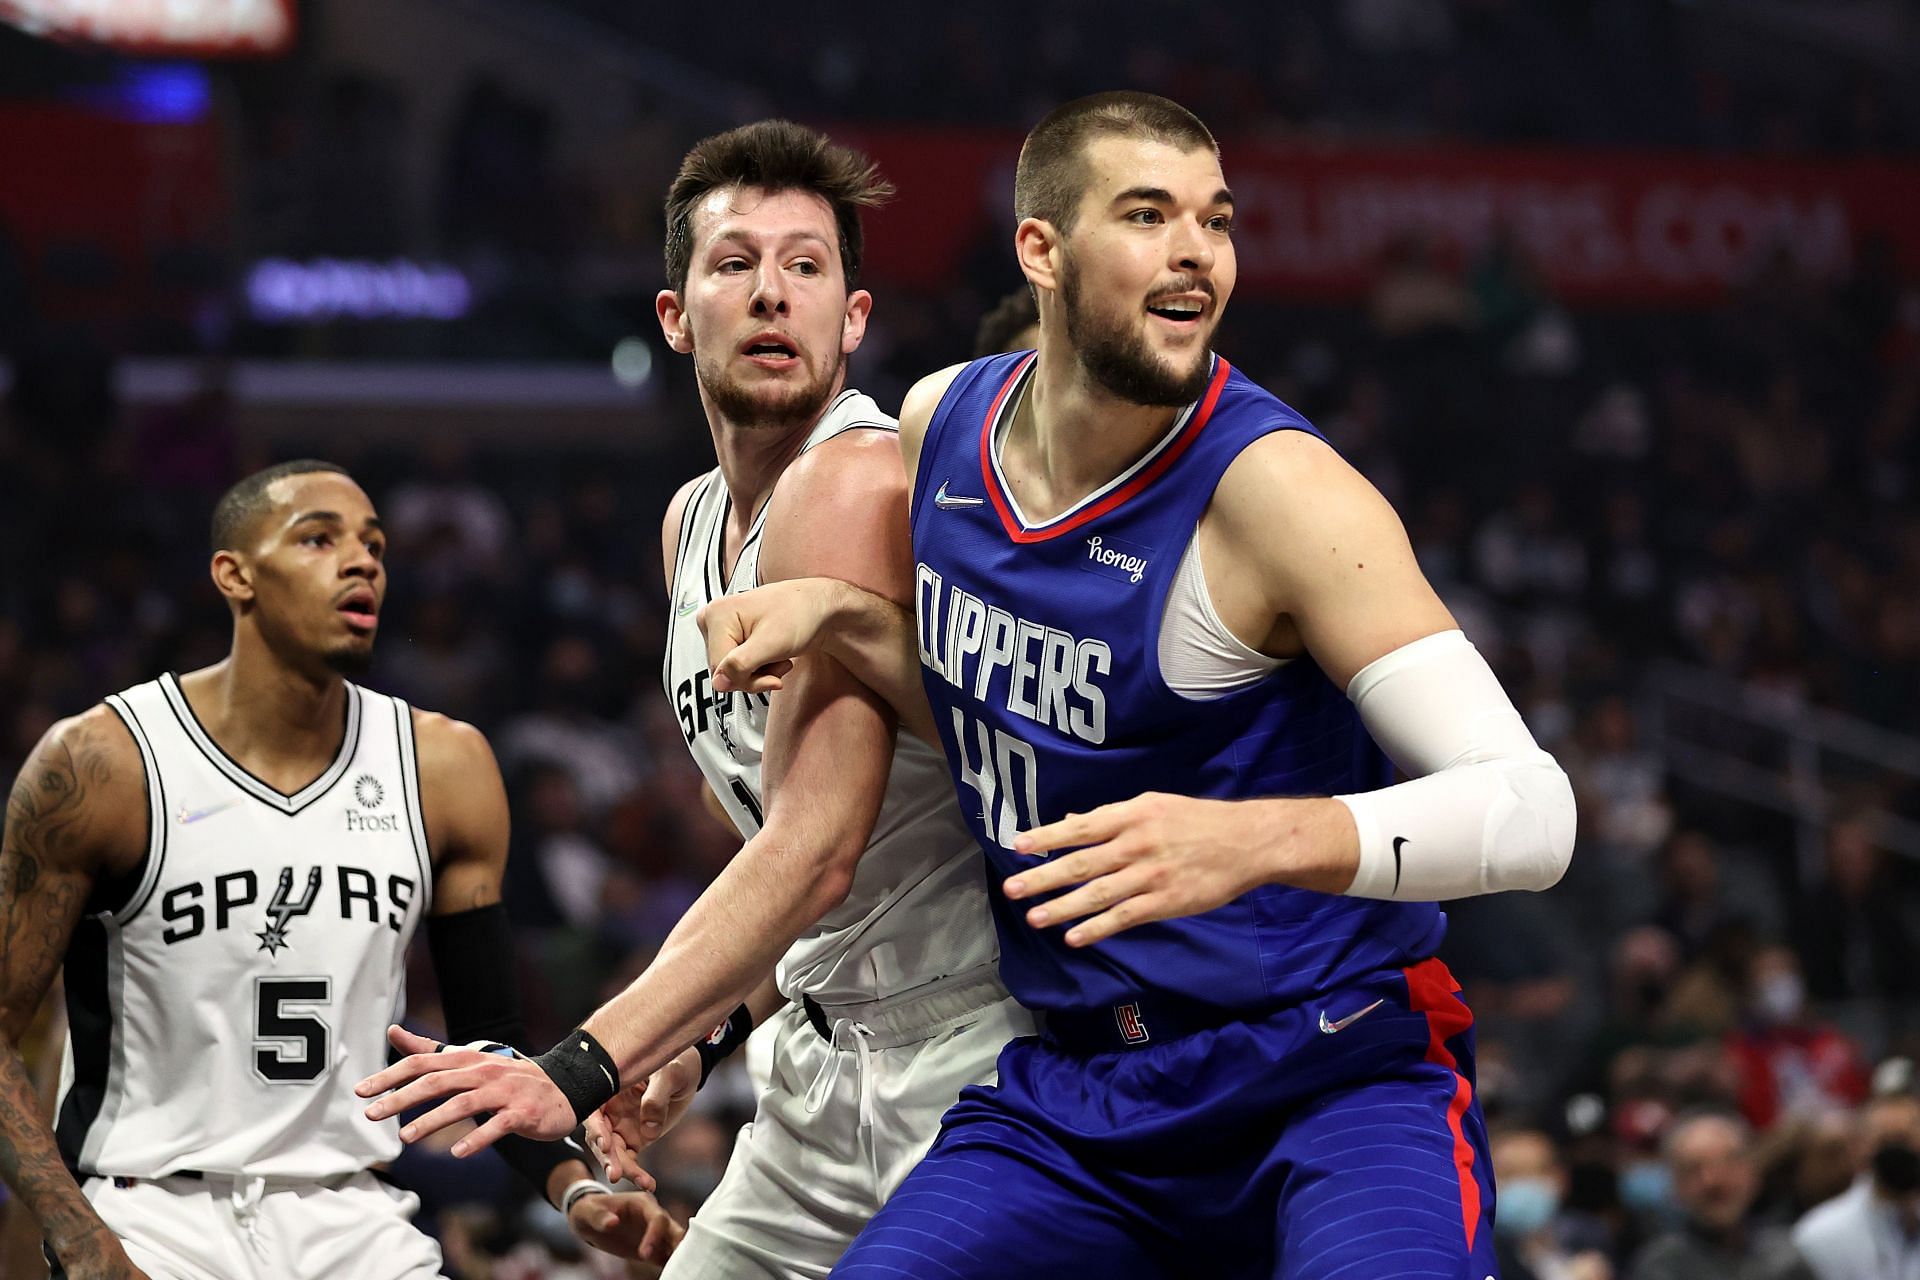 Los Angeles Clippers will look to get to their tenth win of the season against the Pelicans